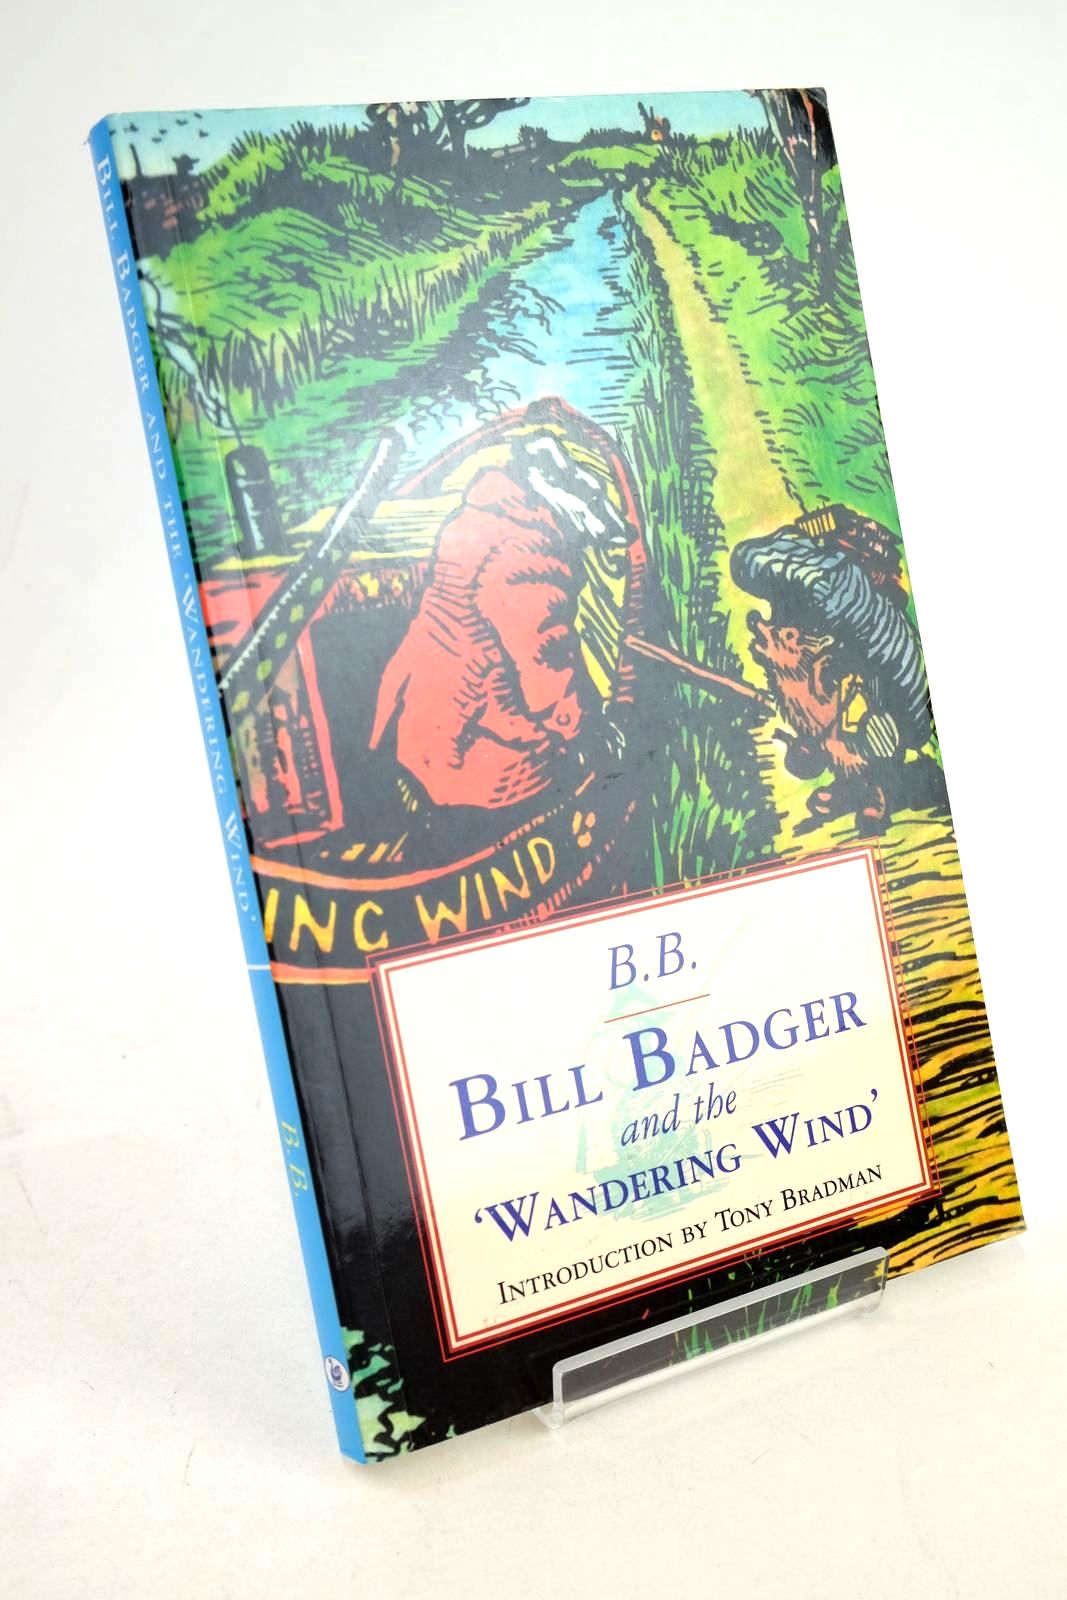 Photo of BILL BADGER AND THE WANDERING WIND written by BB,  Bradman, Tony illustrated by BB,  published by Jane Nissen Books (STOCK CODE: 1327398)  for sale by Stella & Rose's Books